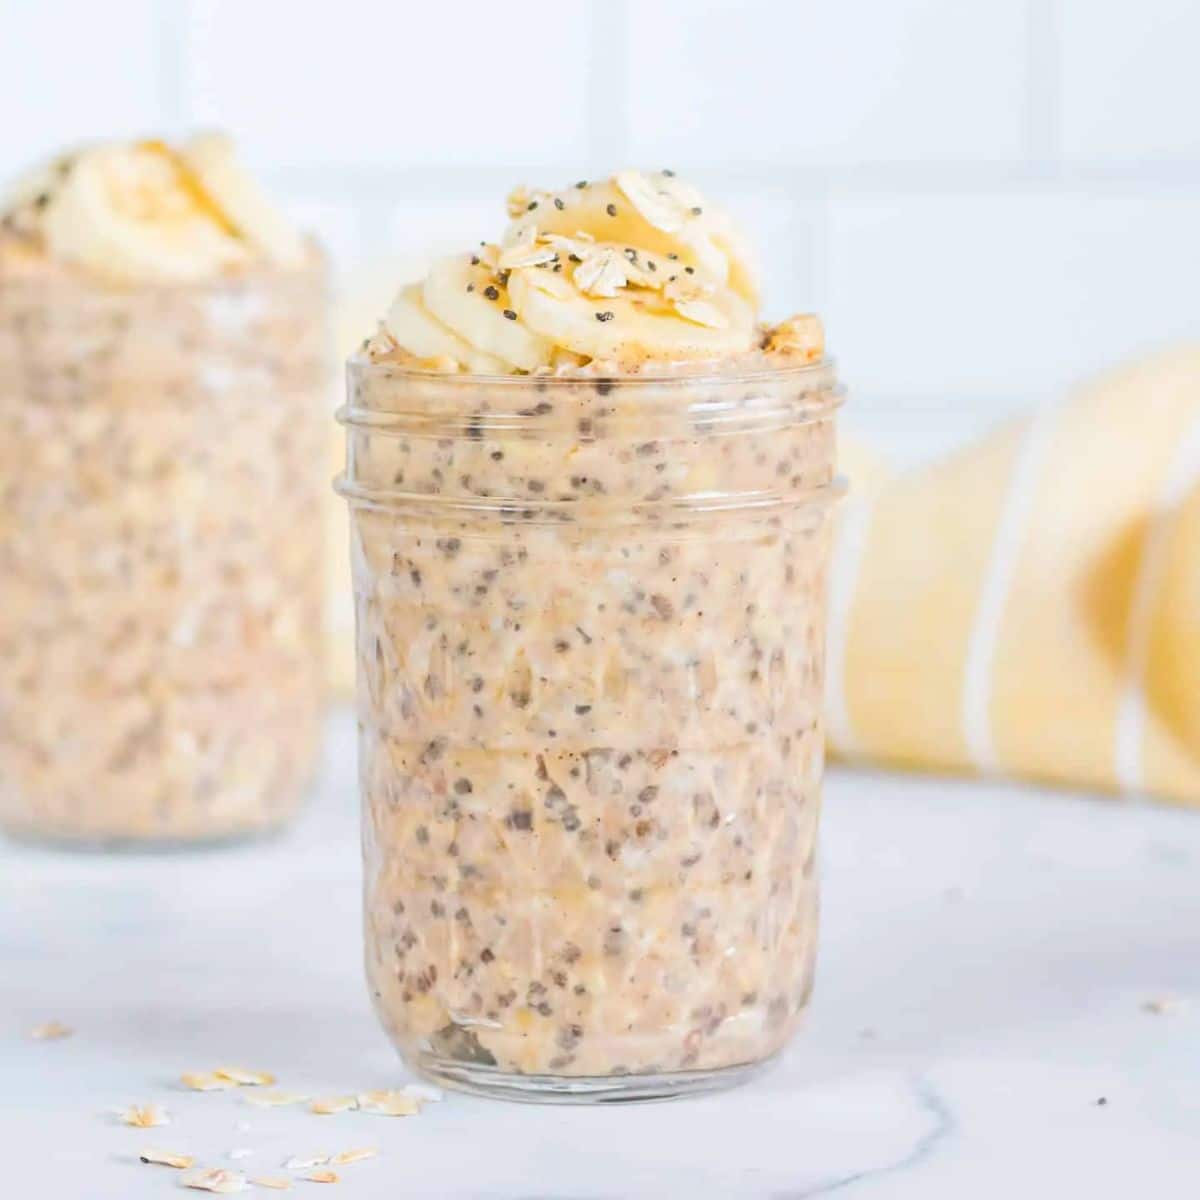 Delicious peanut butter overnight oats in a glass jar.